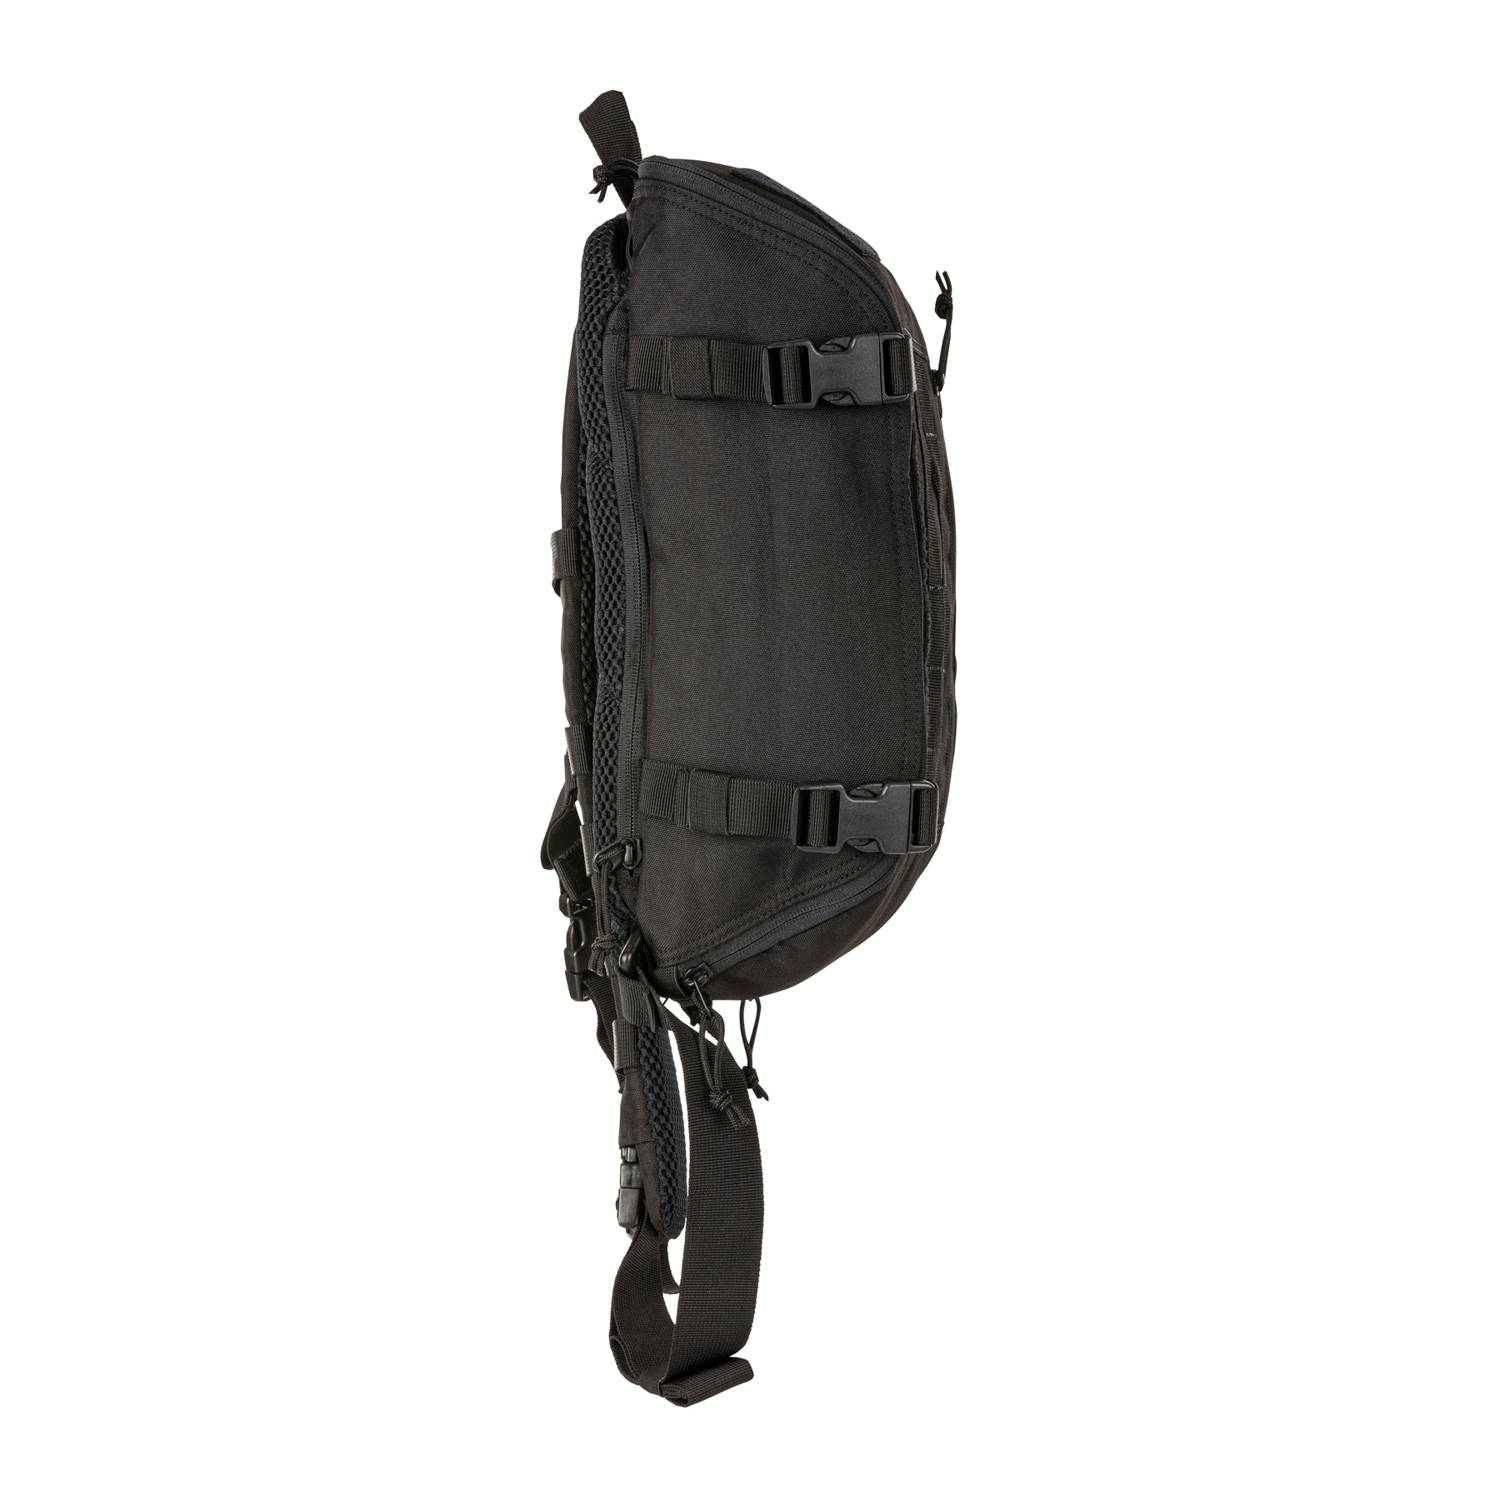 5.11 Tactical: New Rapid Sling Pack - Fast, low profile!